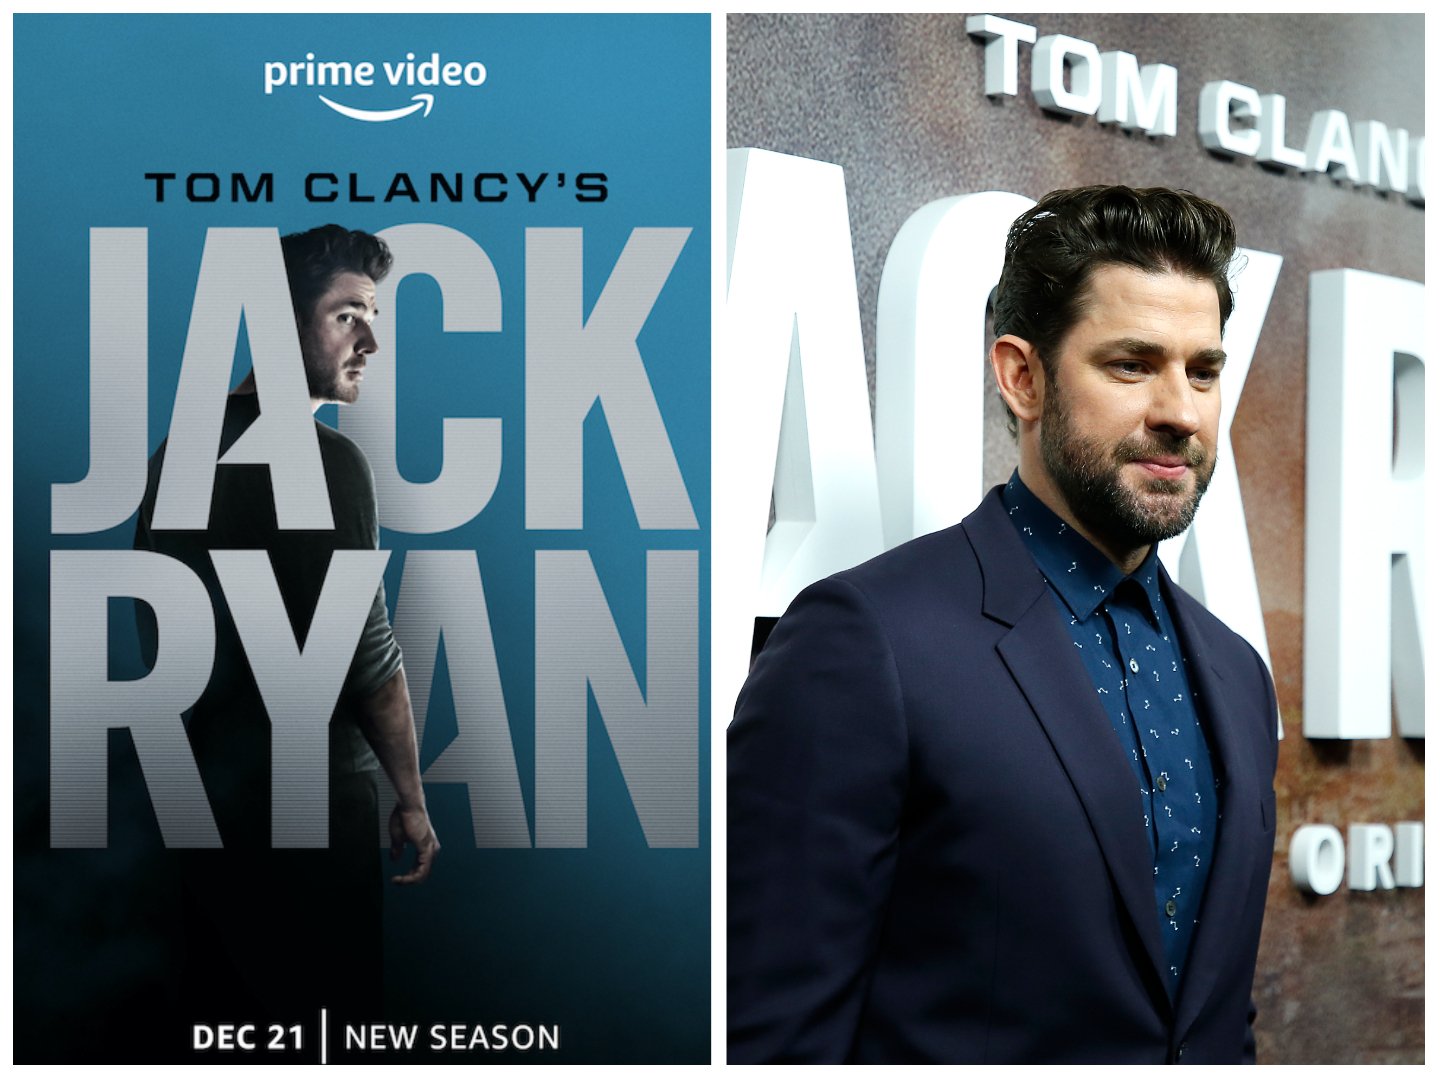 ‘Jack Ryan’ Season 3 Finally Gets Release Date: Everything We Know So Far